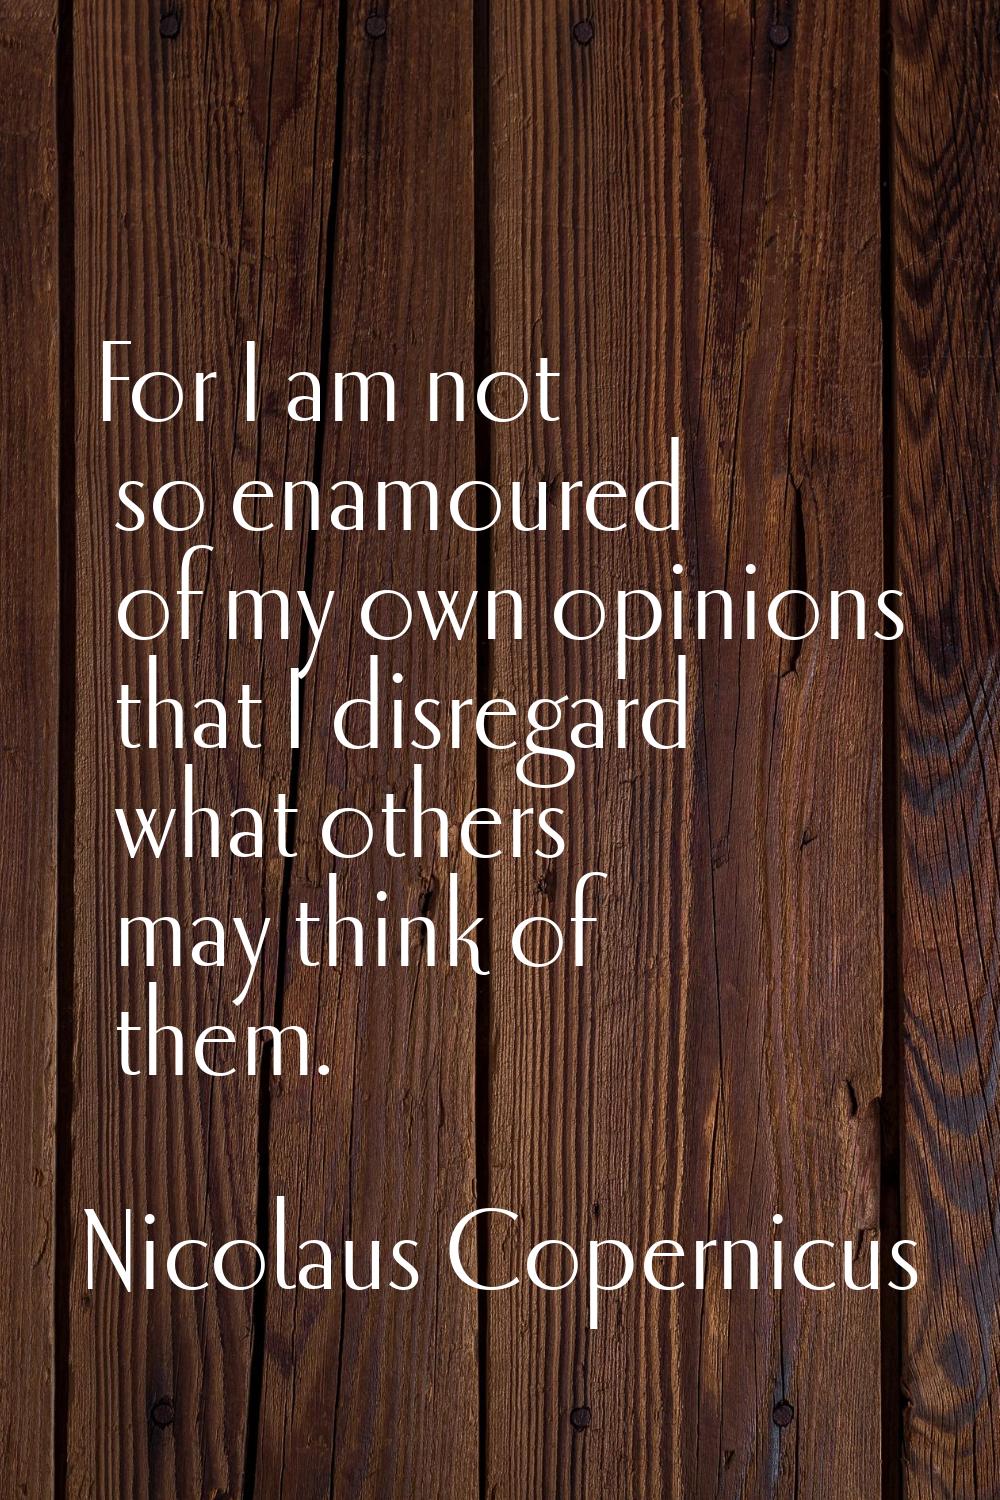 For I am not so enamoured of my own opinions that I disregard what others may think of them.